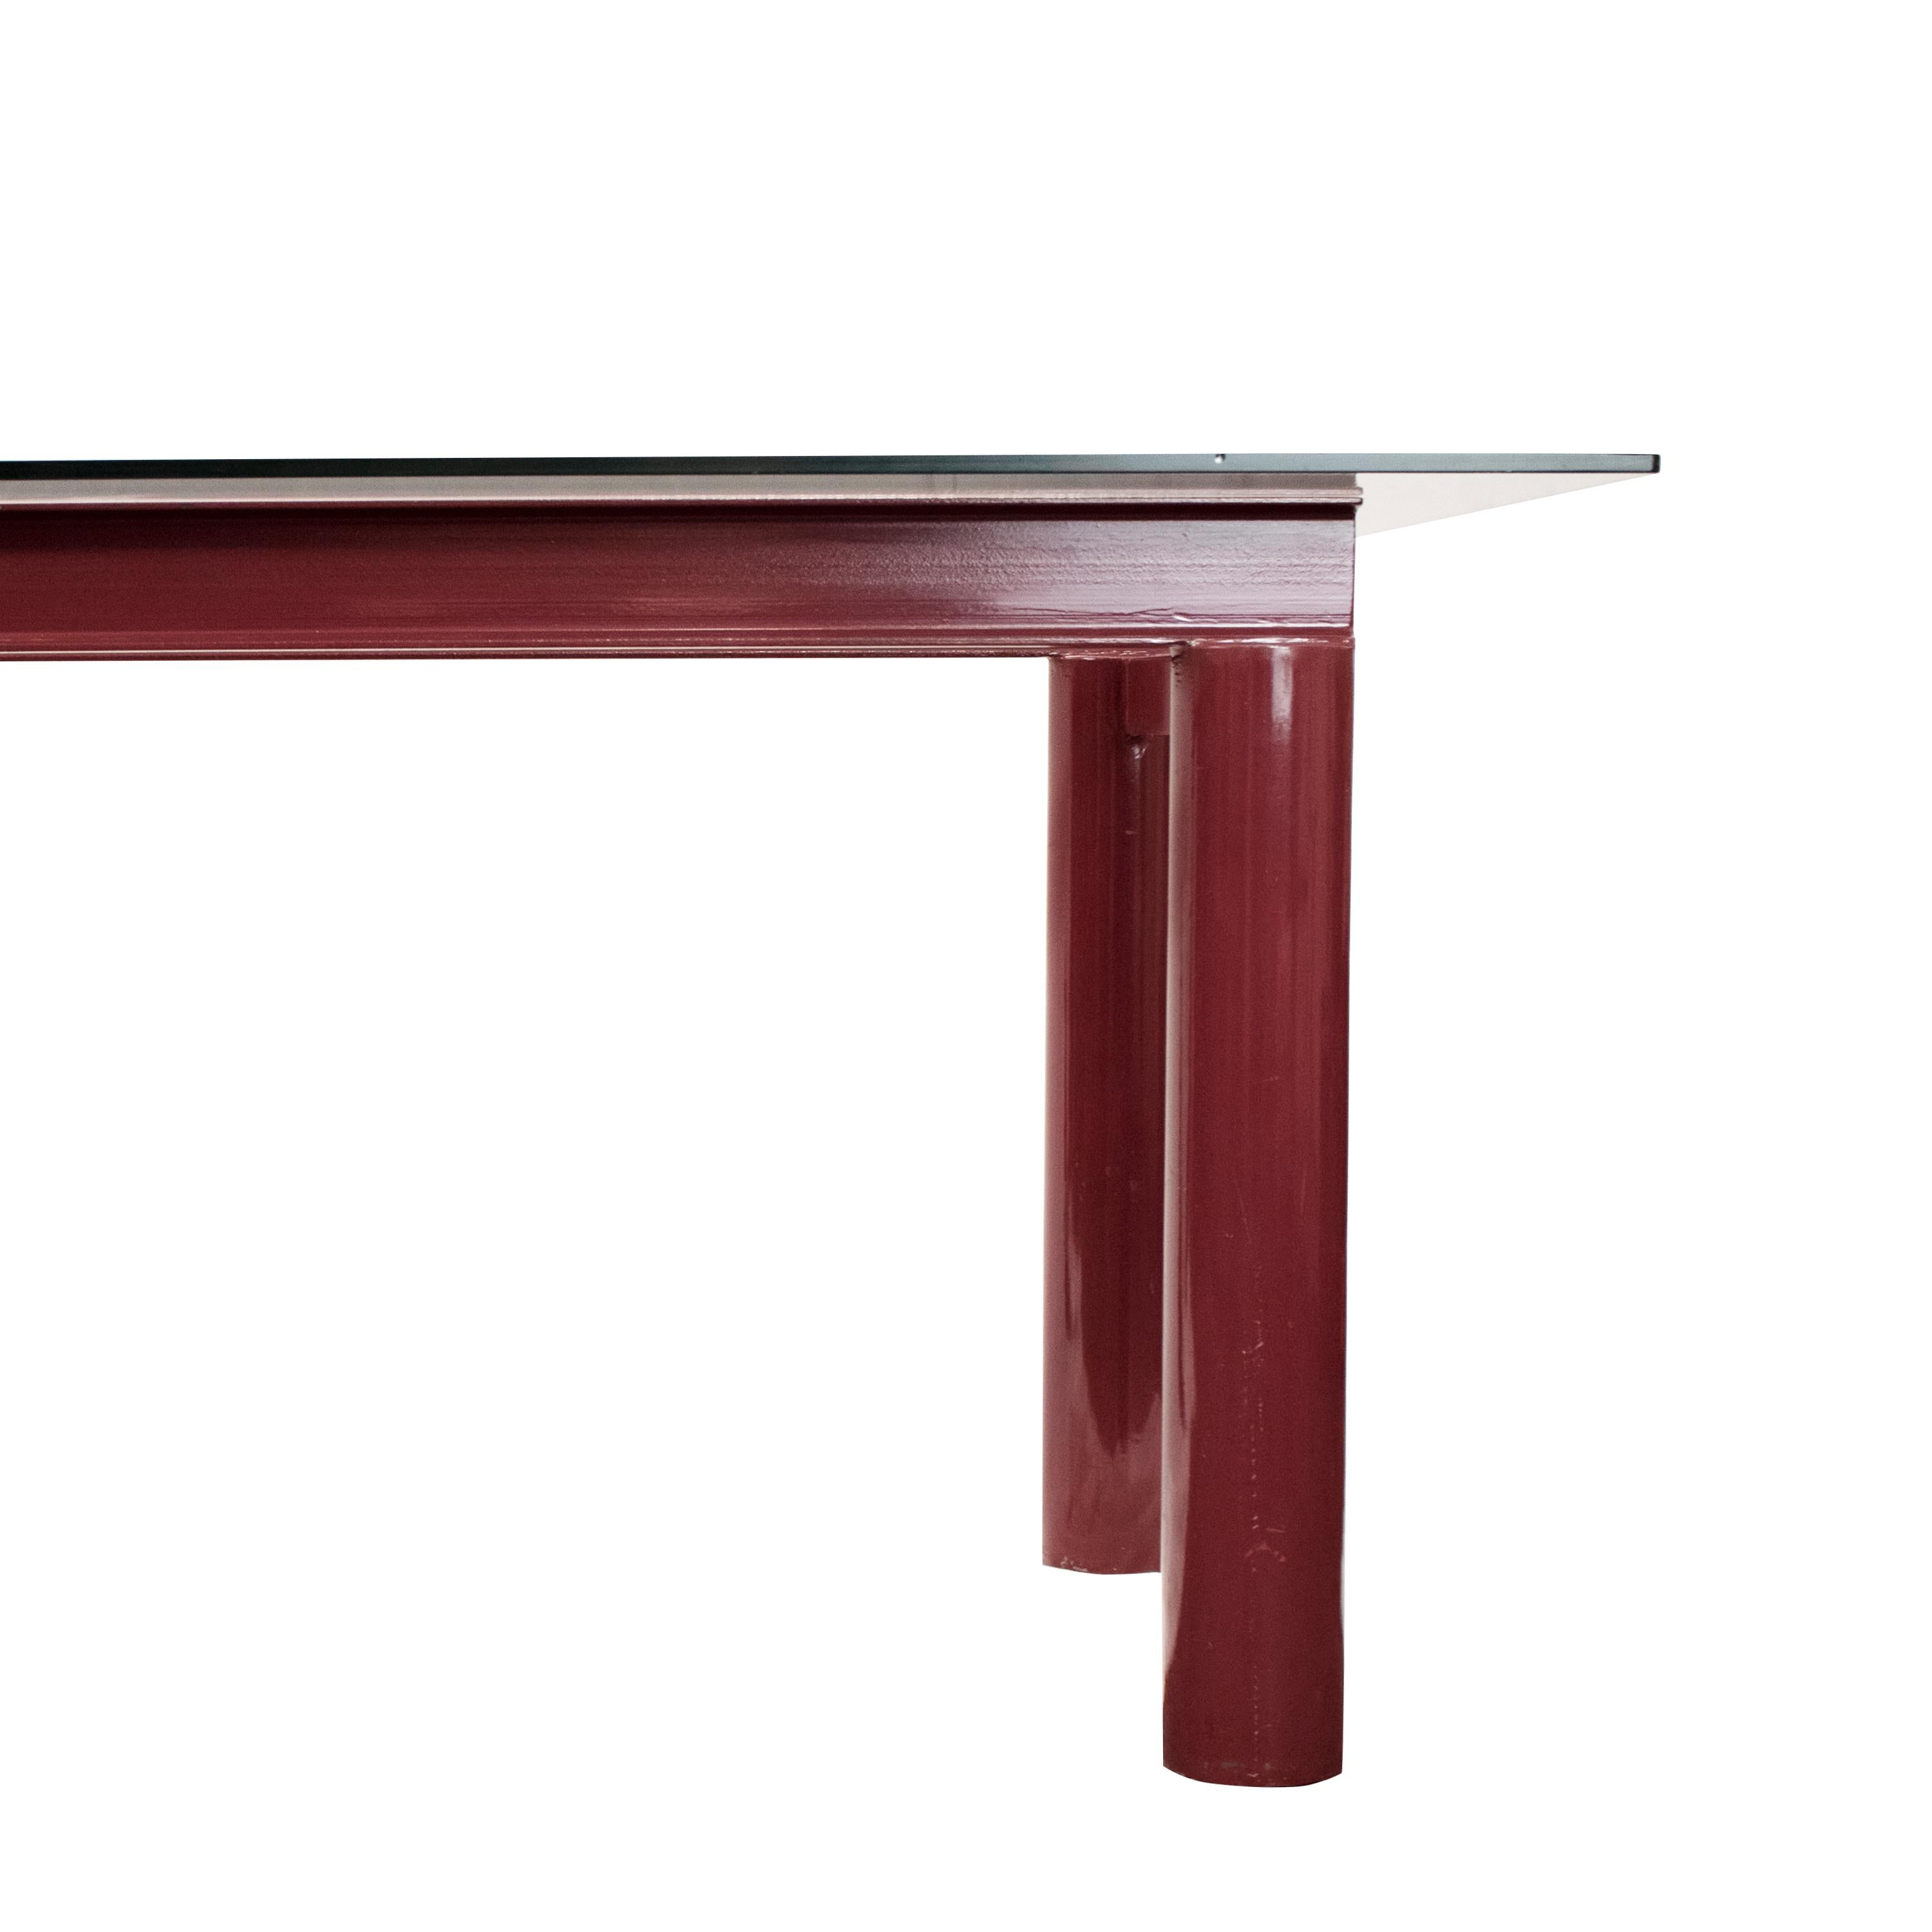 Lacquered Modern Bourdeaux Steel Dining Table with Glass Top 187 x 89 cm, Italia, 1970 For Sale